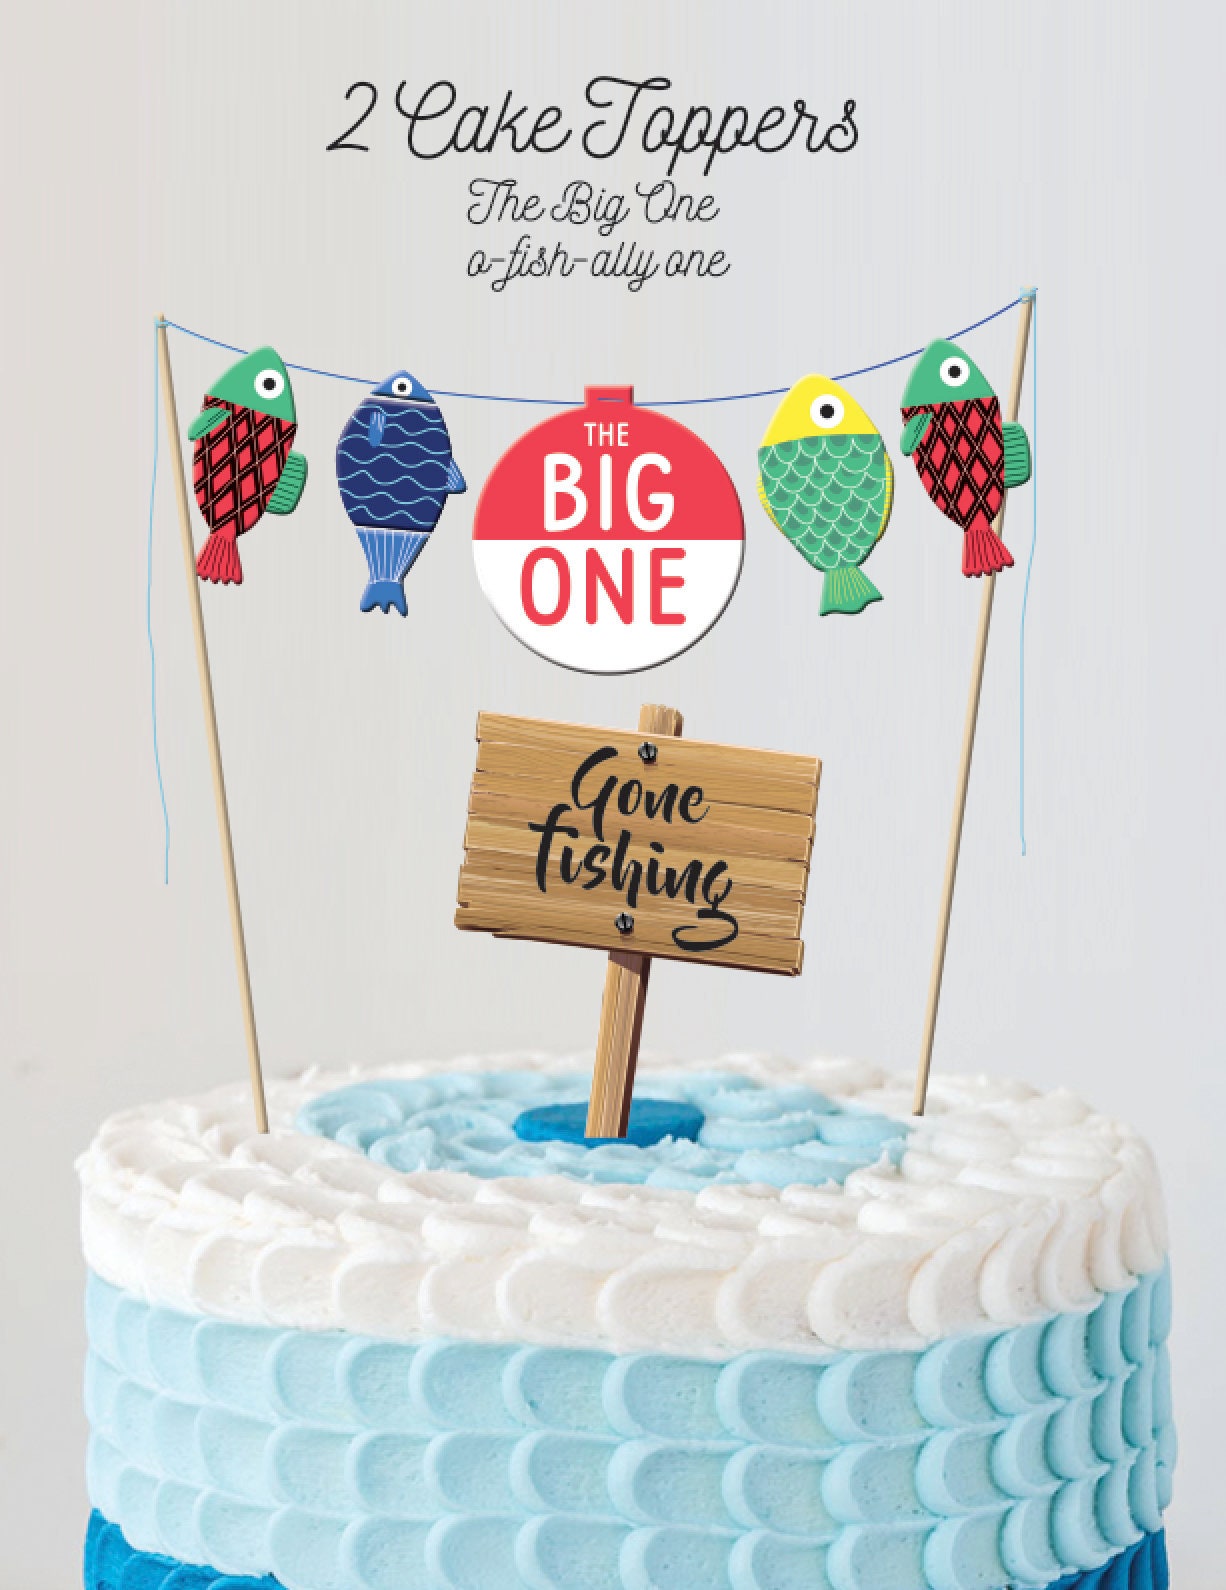 INSTANT DOWNLOAD - The Big One Fishing Cake Topper | Gone Fishing Cake  Topper | The Big One Party Decor | Gone Fishing Party Decor